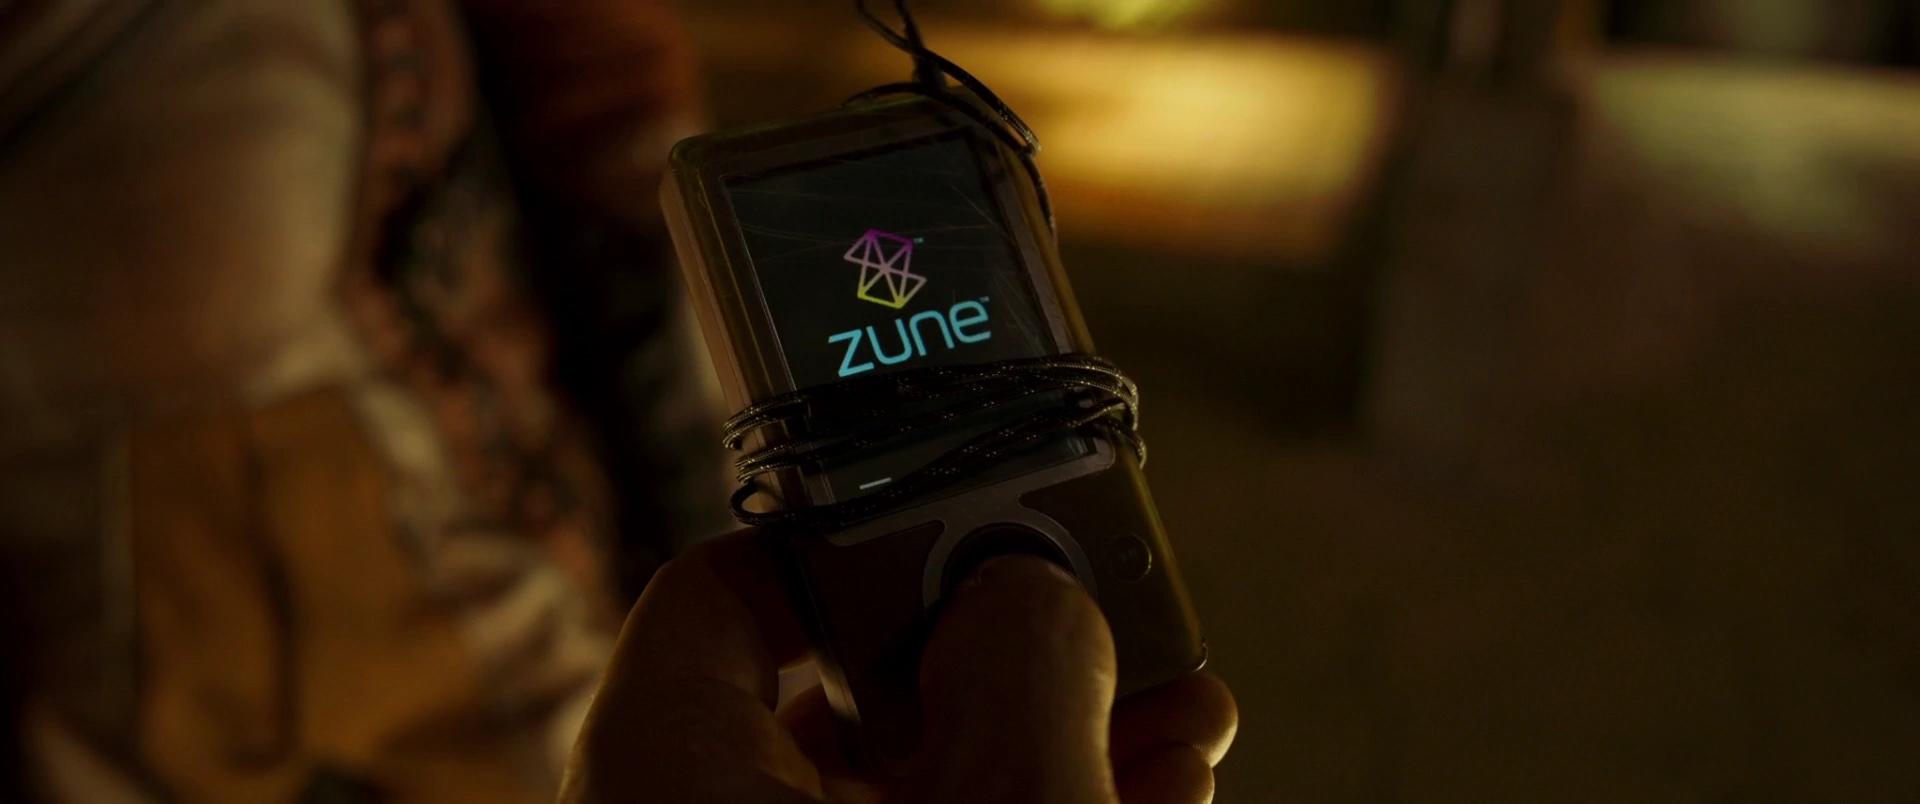 guardians-of-the-galaxy-zune